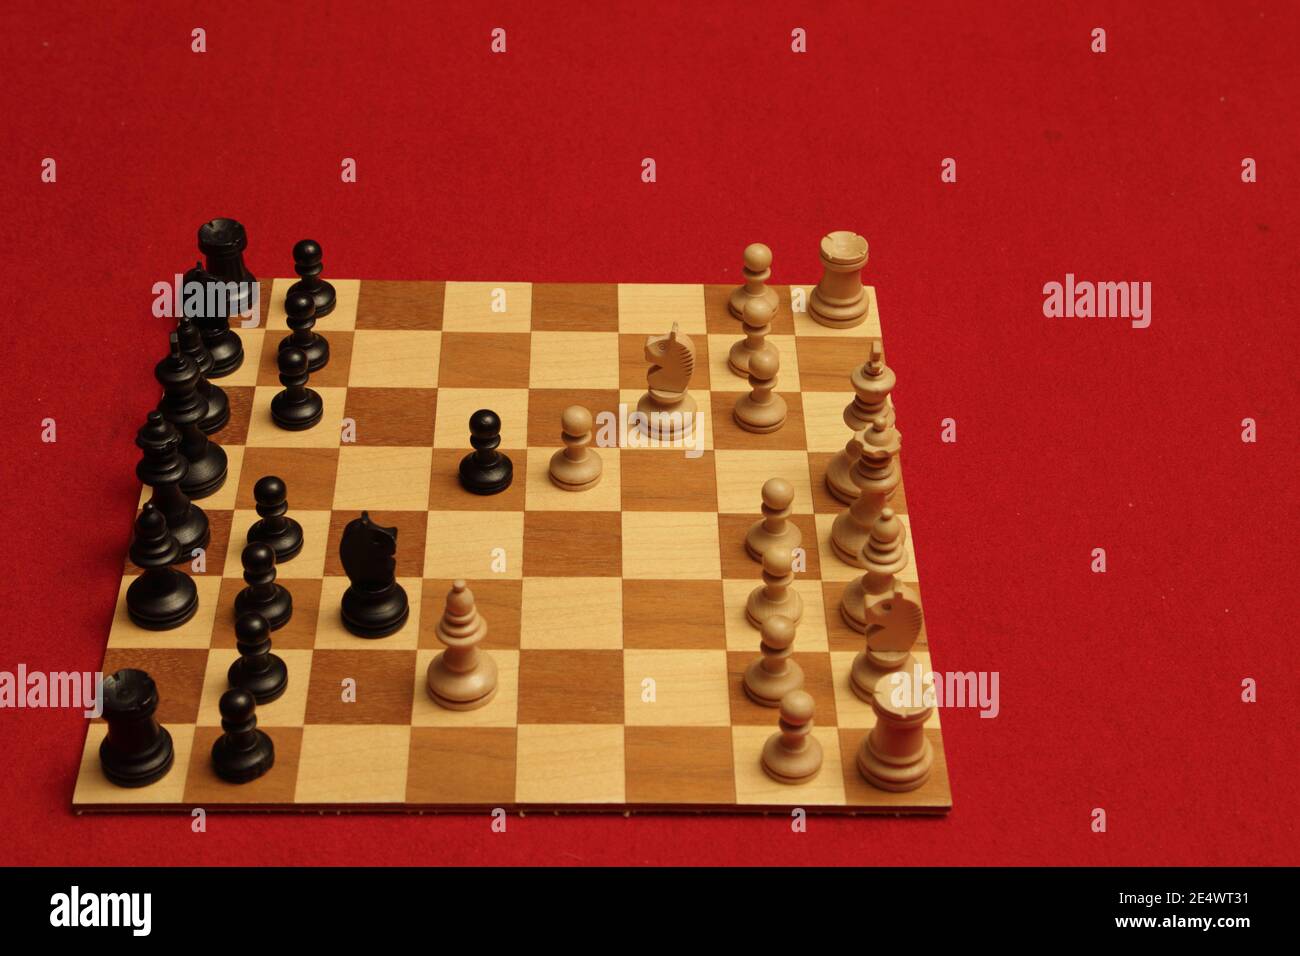 Is Ruy Lopez the strongest chess opening? Find out from Opening Master